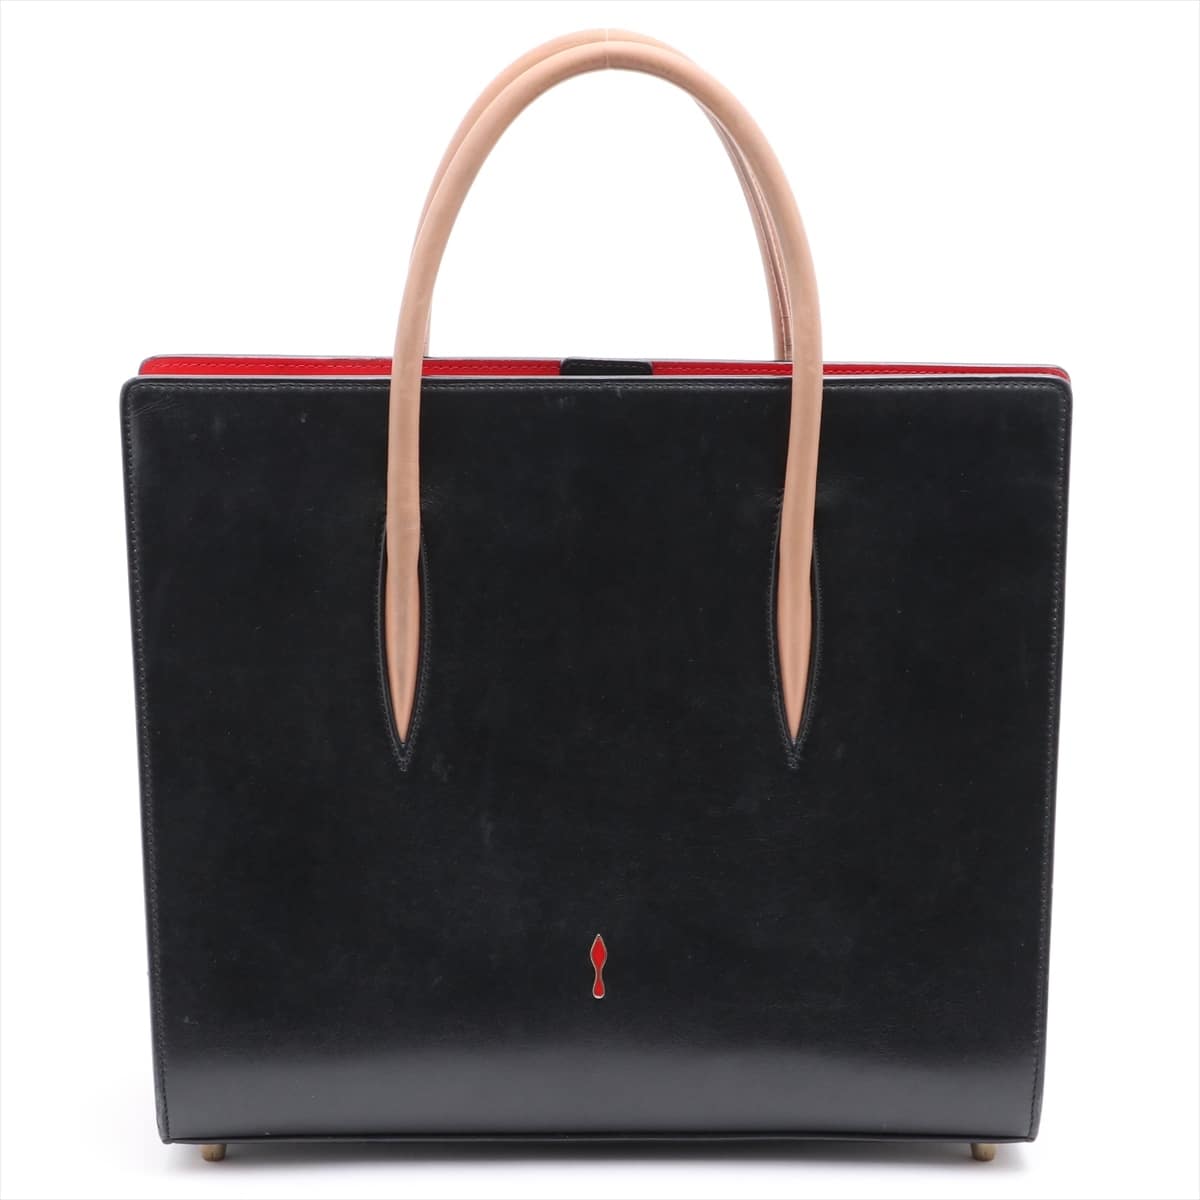 Christian Louboutin Paloma Leather & patent 2 way tote bag Black x red